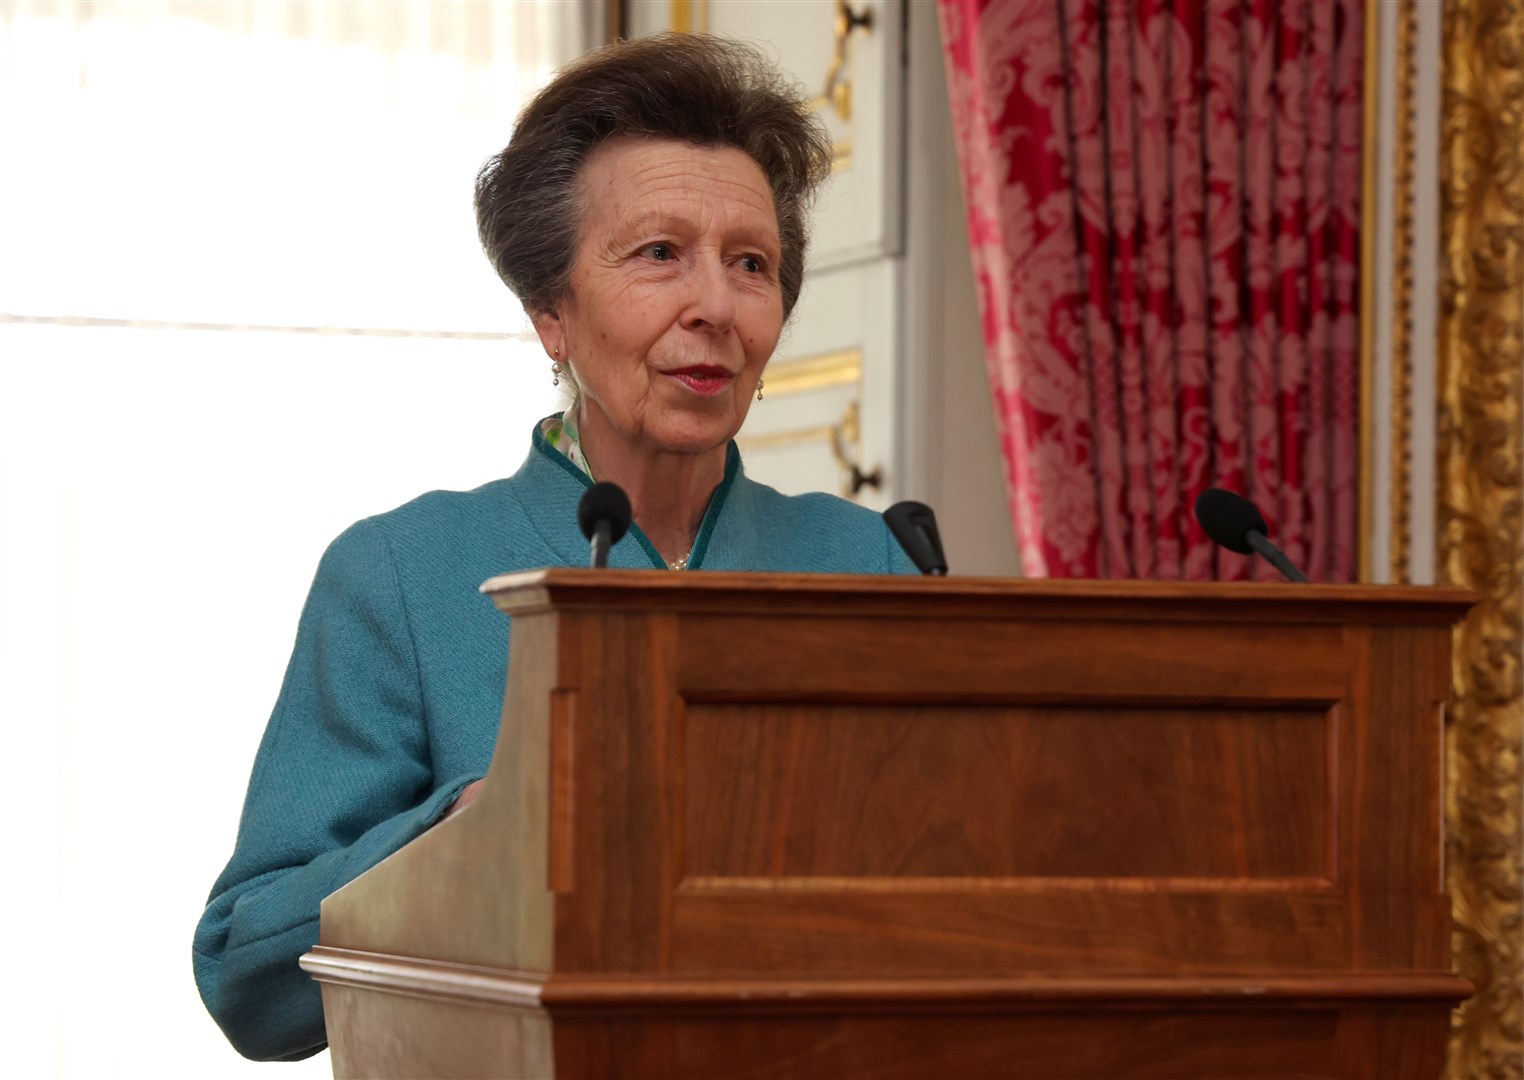 The Princess Royal read the King’s speech on his behalf at the reception (Tristan Fewings/PA)